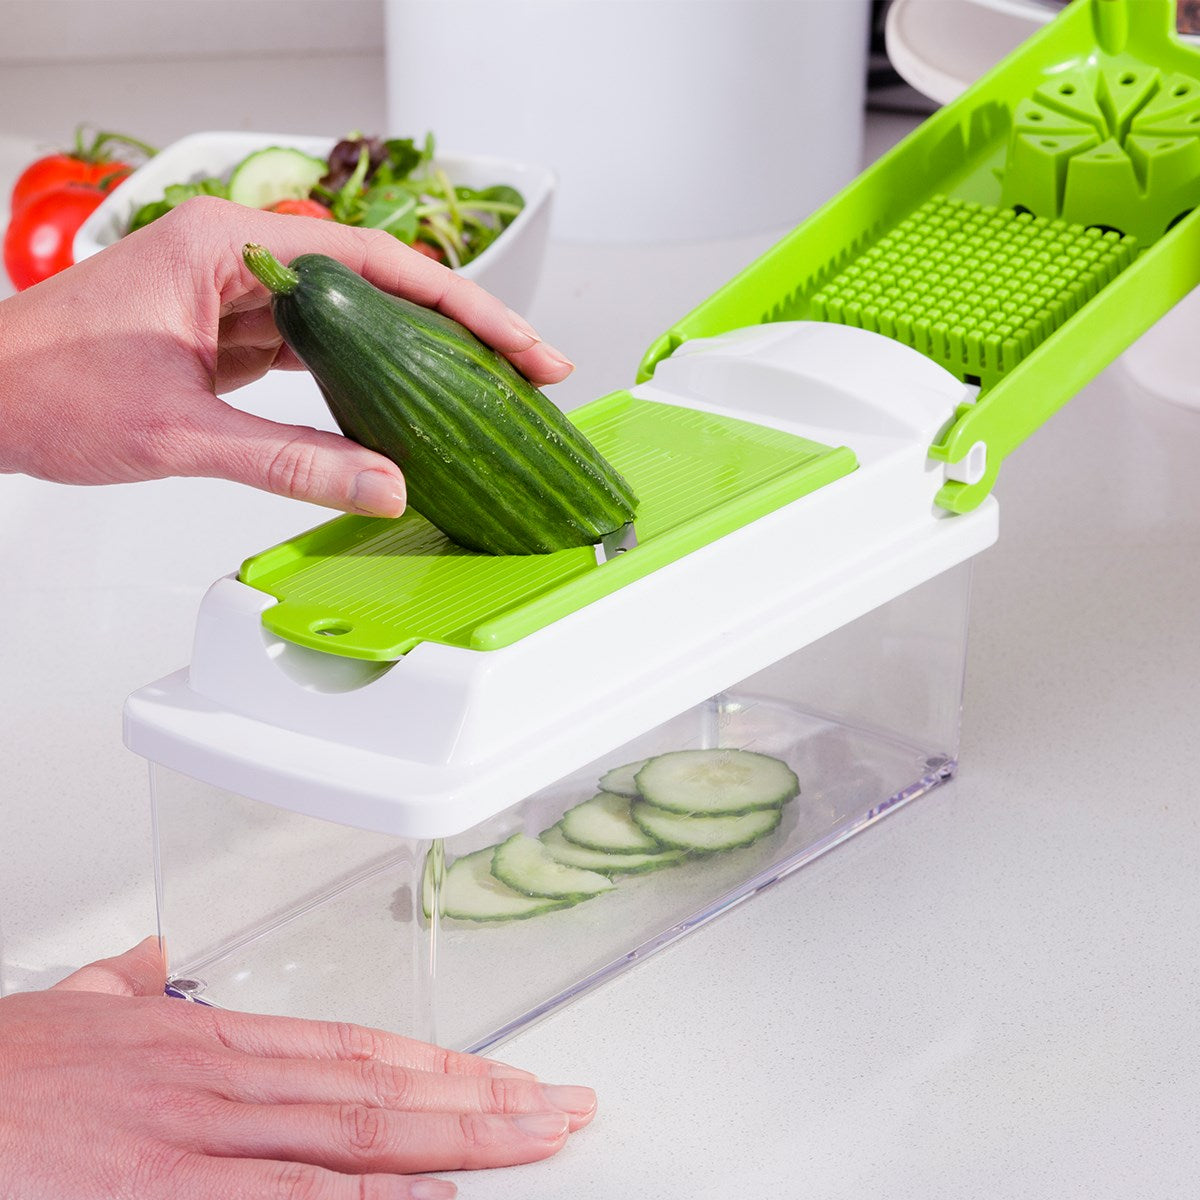 SPEEDY CHOPPER 12 PIECES NICER DICER PLUS FRUIT AND VEGETABLE